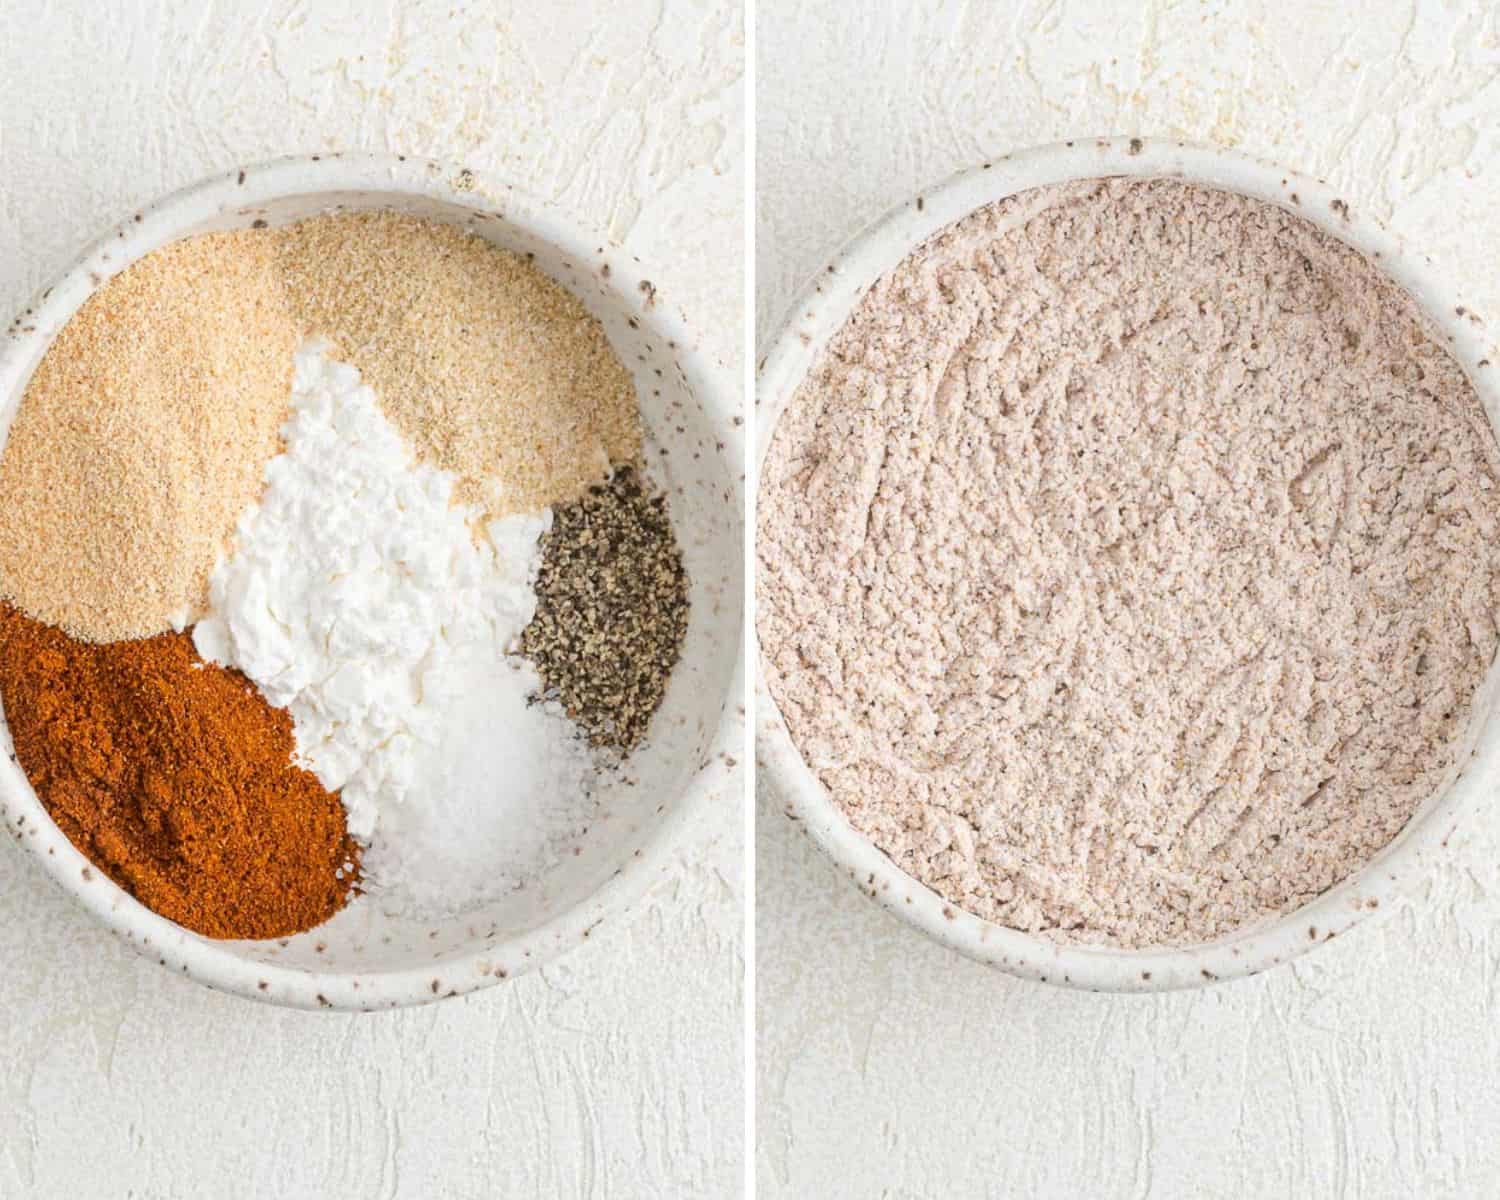 Spices and cornstarch before and after mixing.